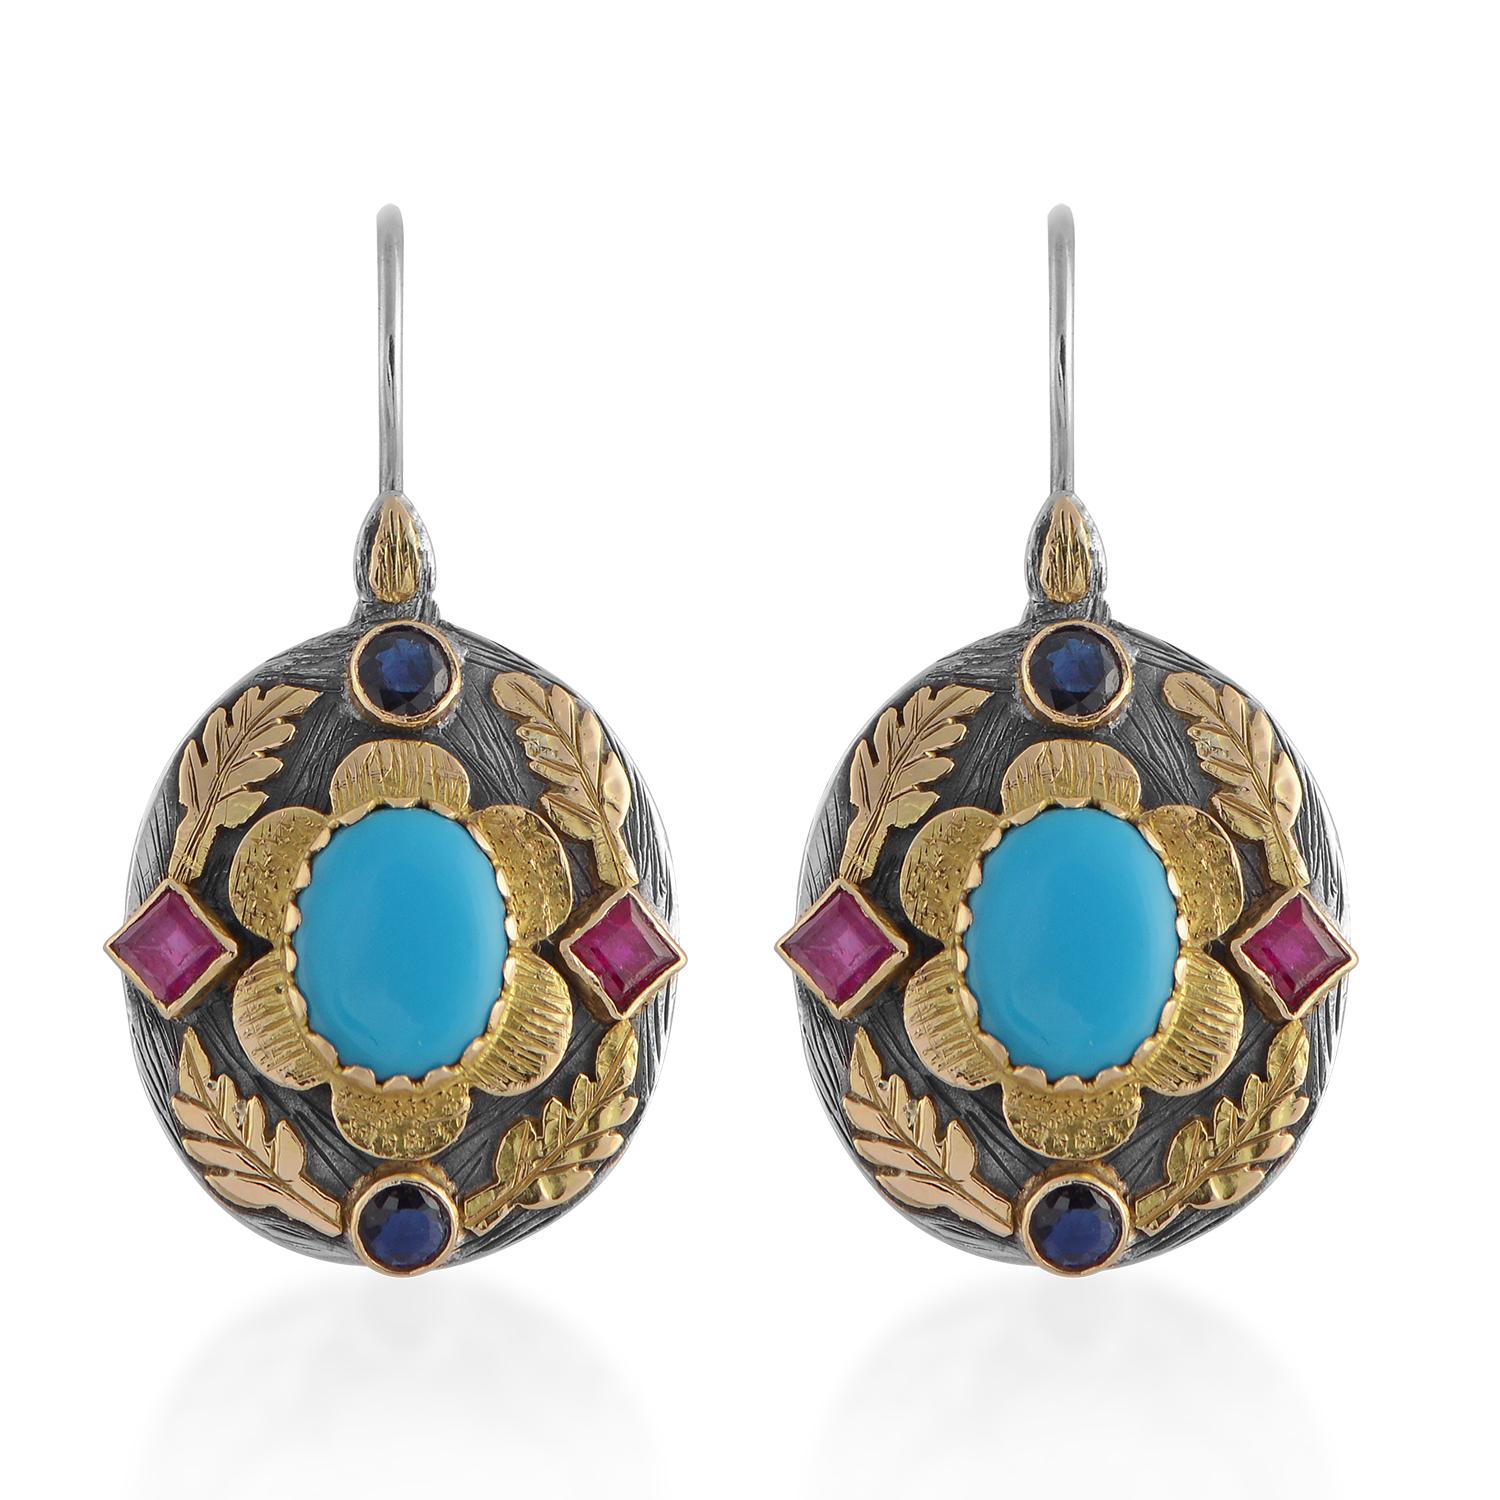 

The Turquoise Ruby Sapphire 18 Karat Gold Silver Dangle Earrings, are one of a kind and have been handmade in our workshops. They are embedded with turquoise which is surrounded by rubies and blue sapphires set in 18kt gold. The base of the